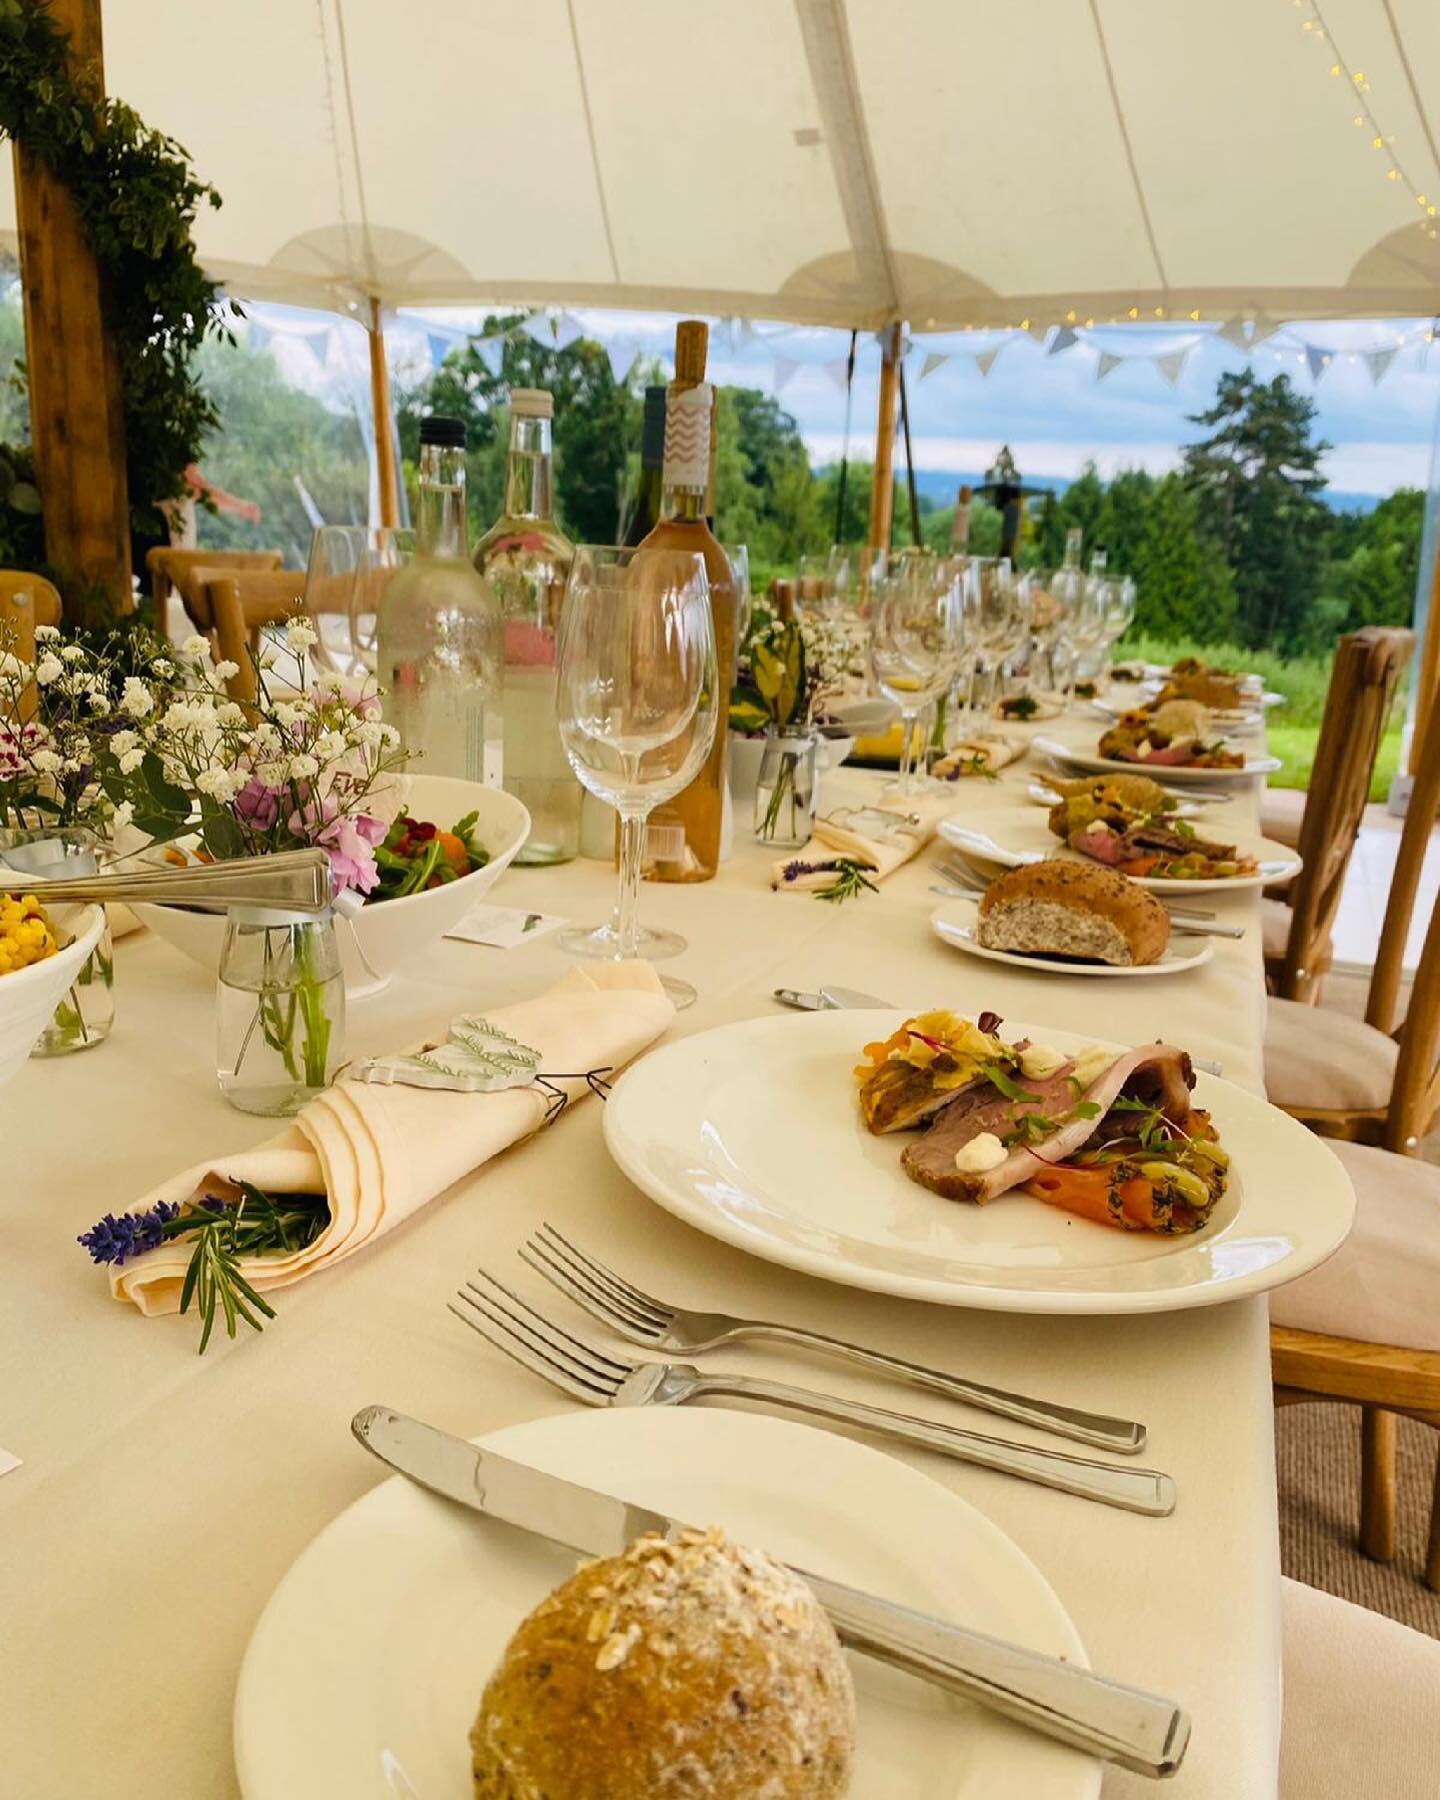 𝐹𝑒𝓁𝒾𝒸𝒾𝓉𝓎 &amp; 𝑅𝑜𝒷

A beautiful day for such a lovely couple .... Congratulations guys &amp; thank you for having us ! 

HOME CURED LOCH DUART SALMON
Cured for 24hrs in citrus, peppercorns &amp; fennel pollen &amp; served with Lemon caper 